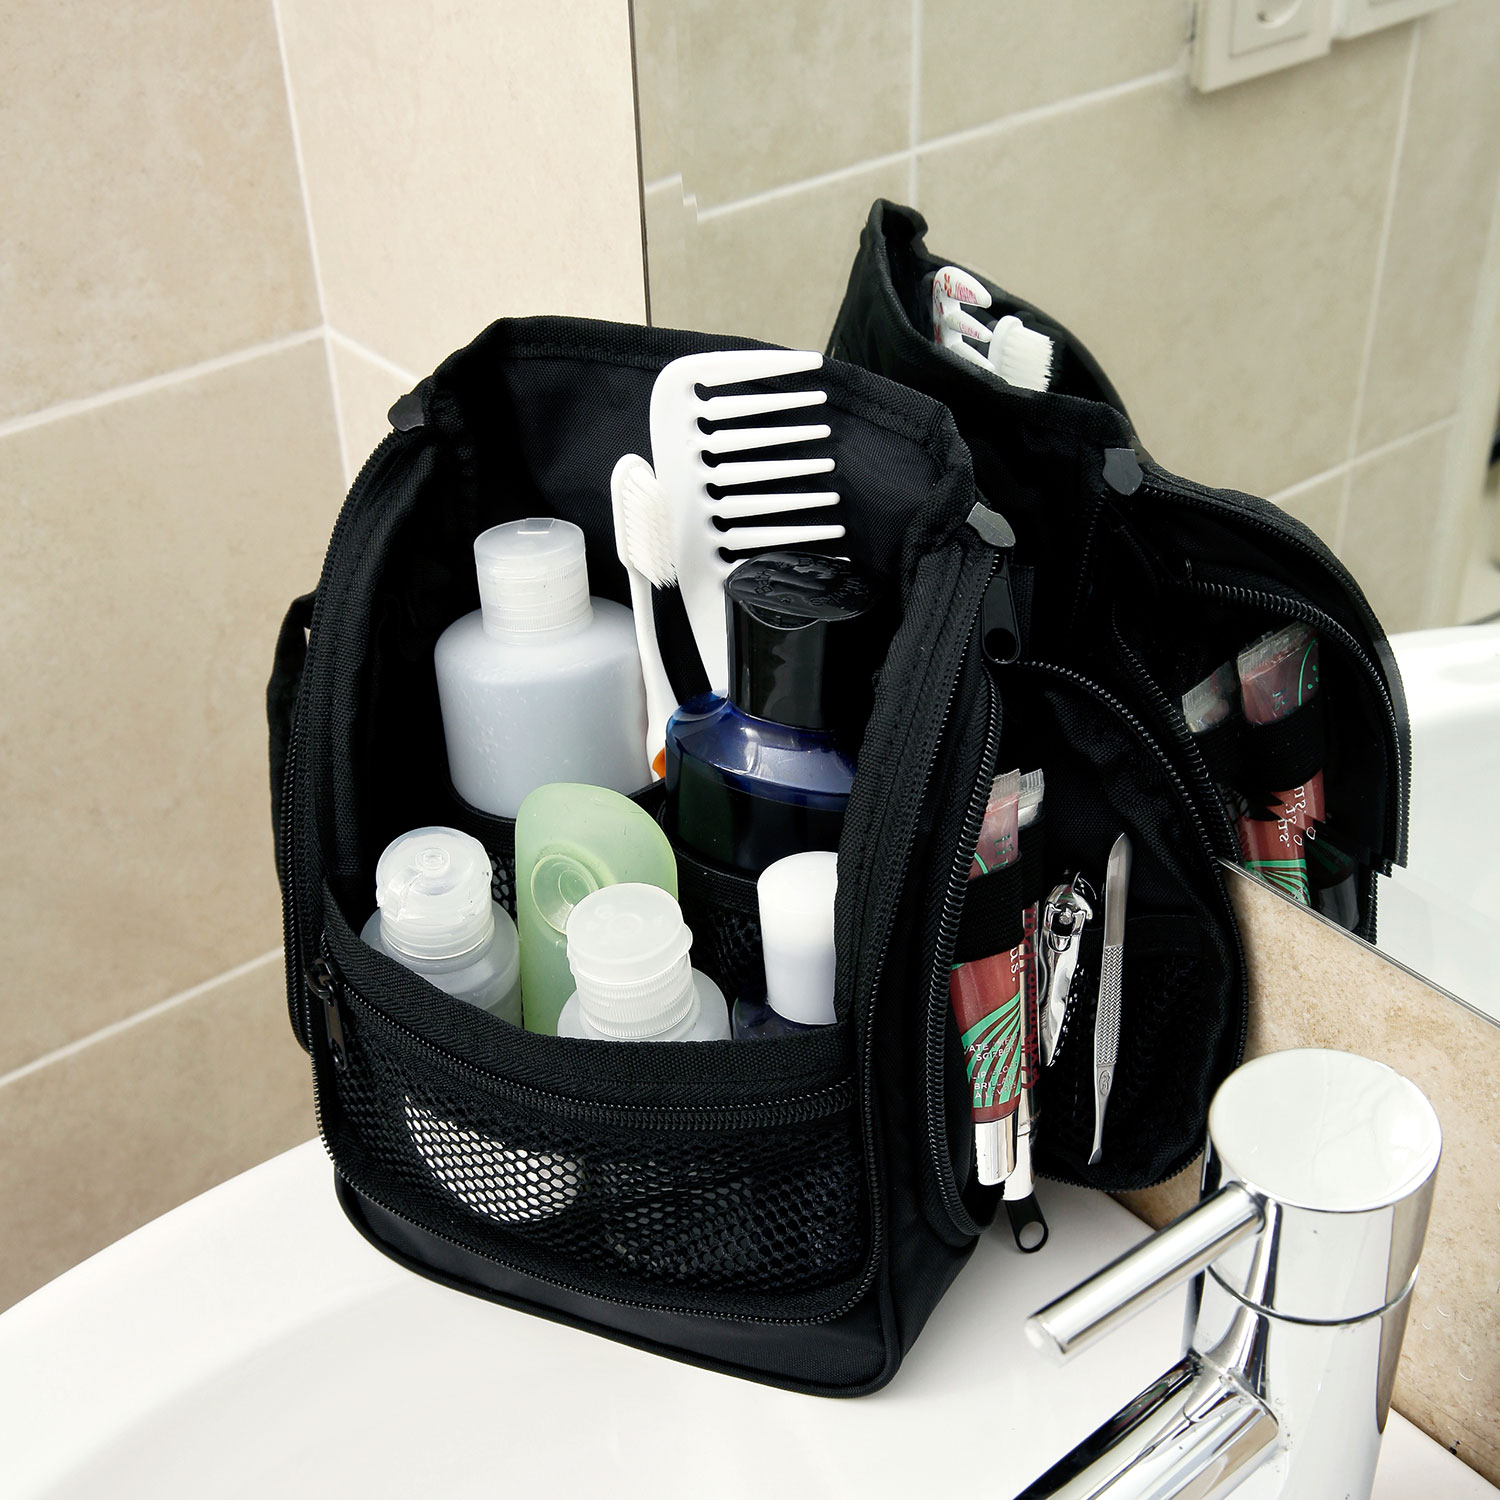 NeatPack Compact Hanging Toiletry Bag, Black - image 3 of 10